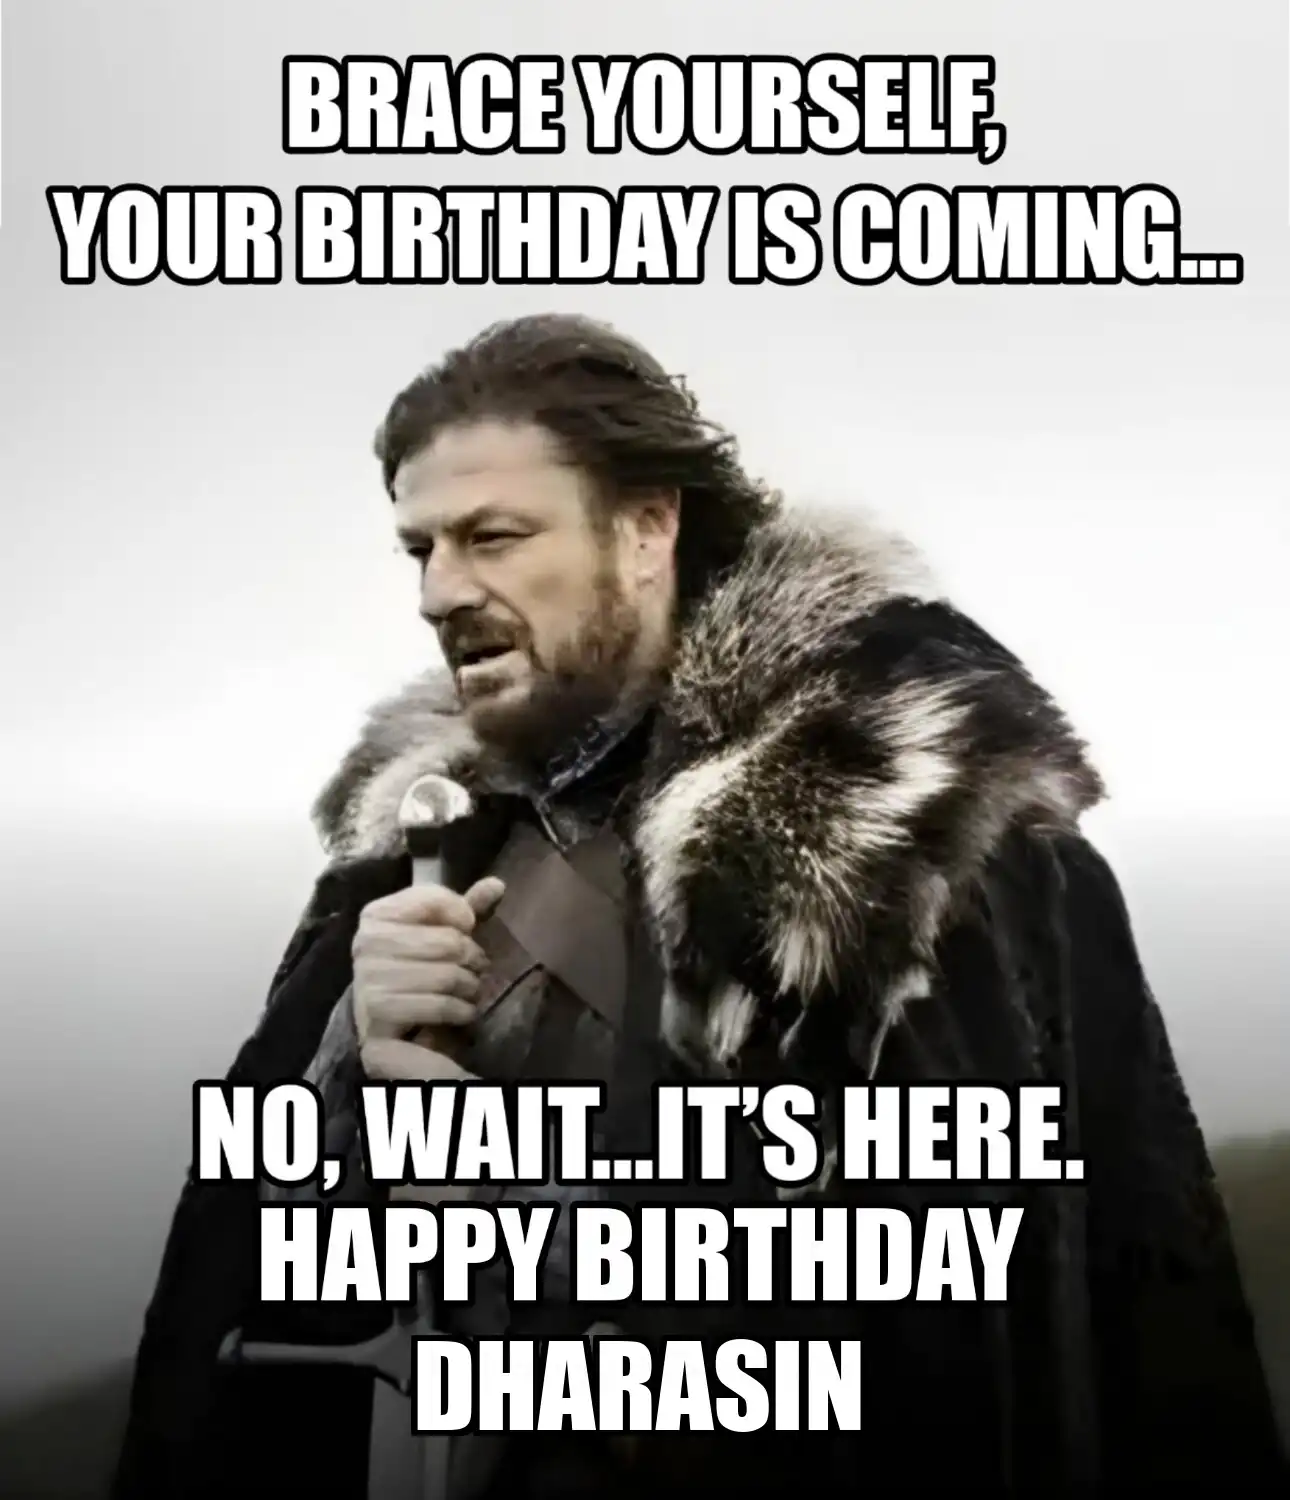 Happy Birthday Dharasin Brace Yourself Your Birthday Is Coming Meme